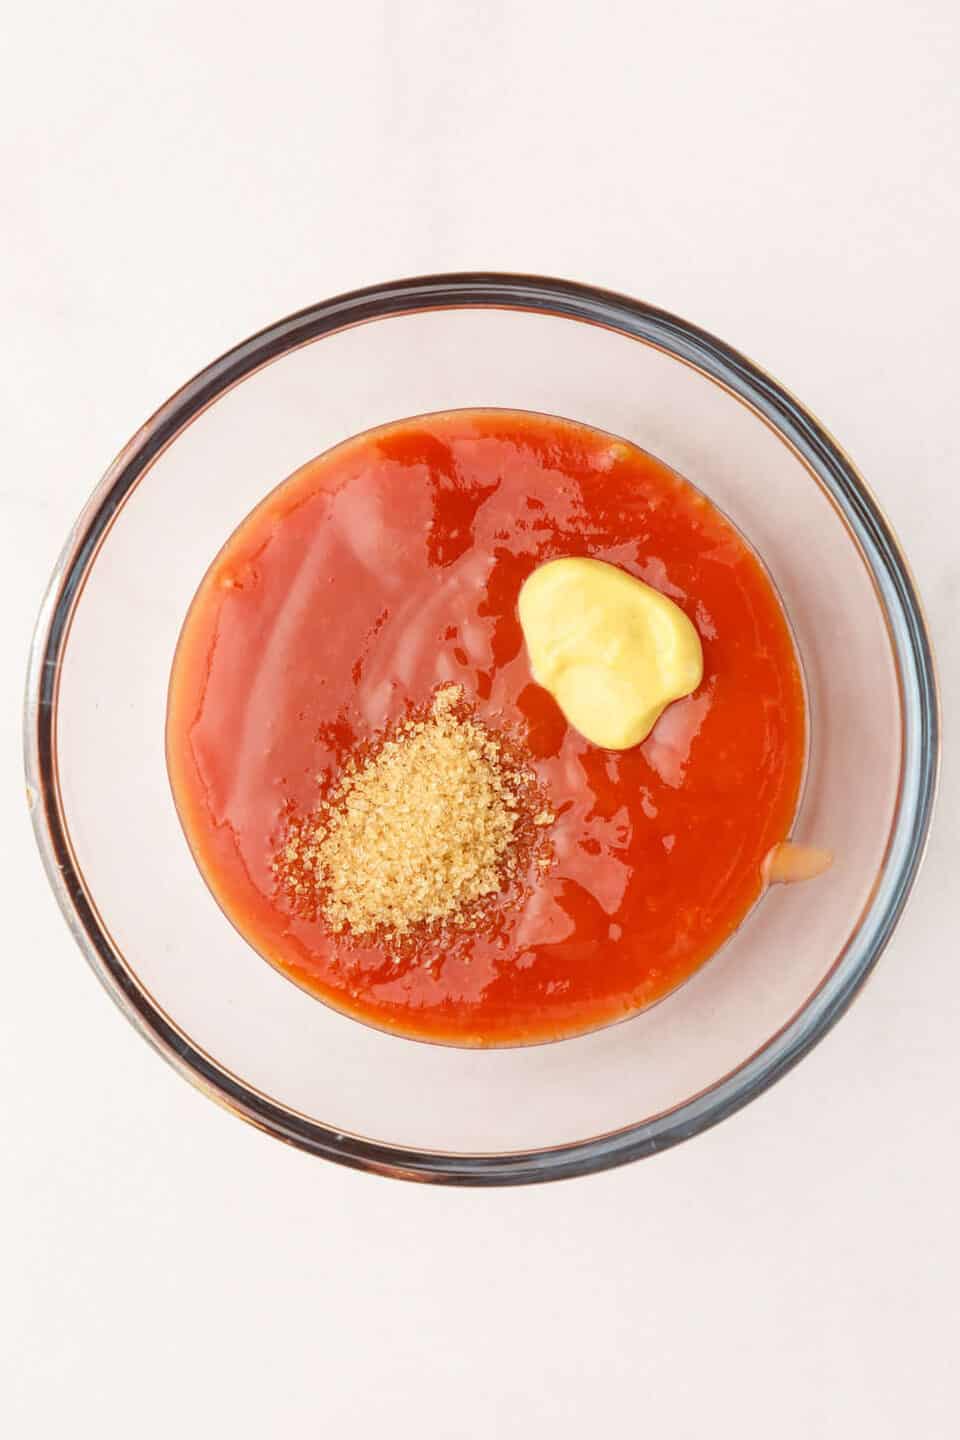 meatloaf ketchup sauce mixture in a large glass bowl.